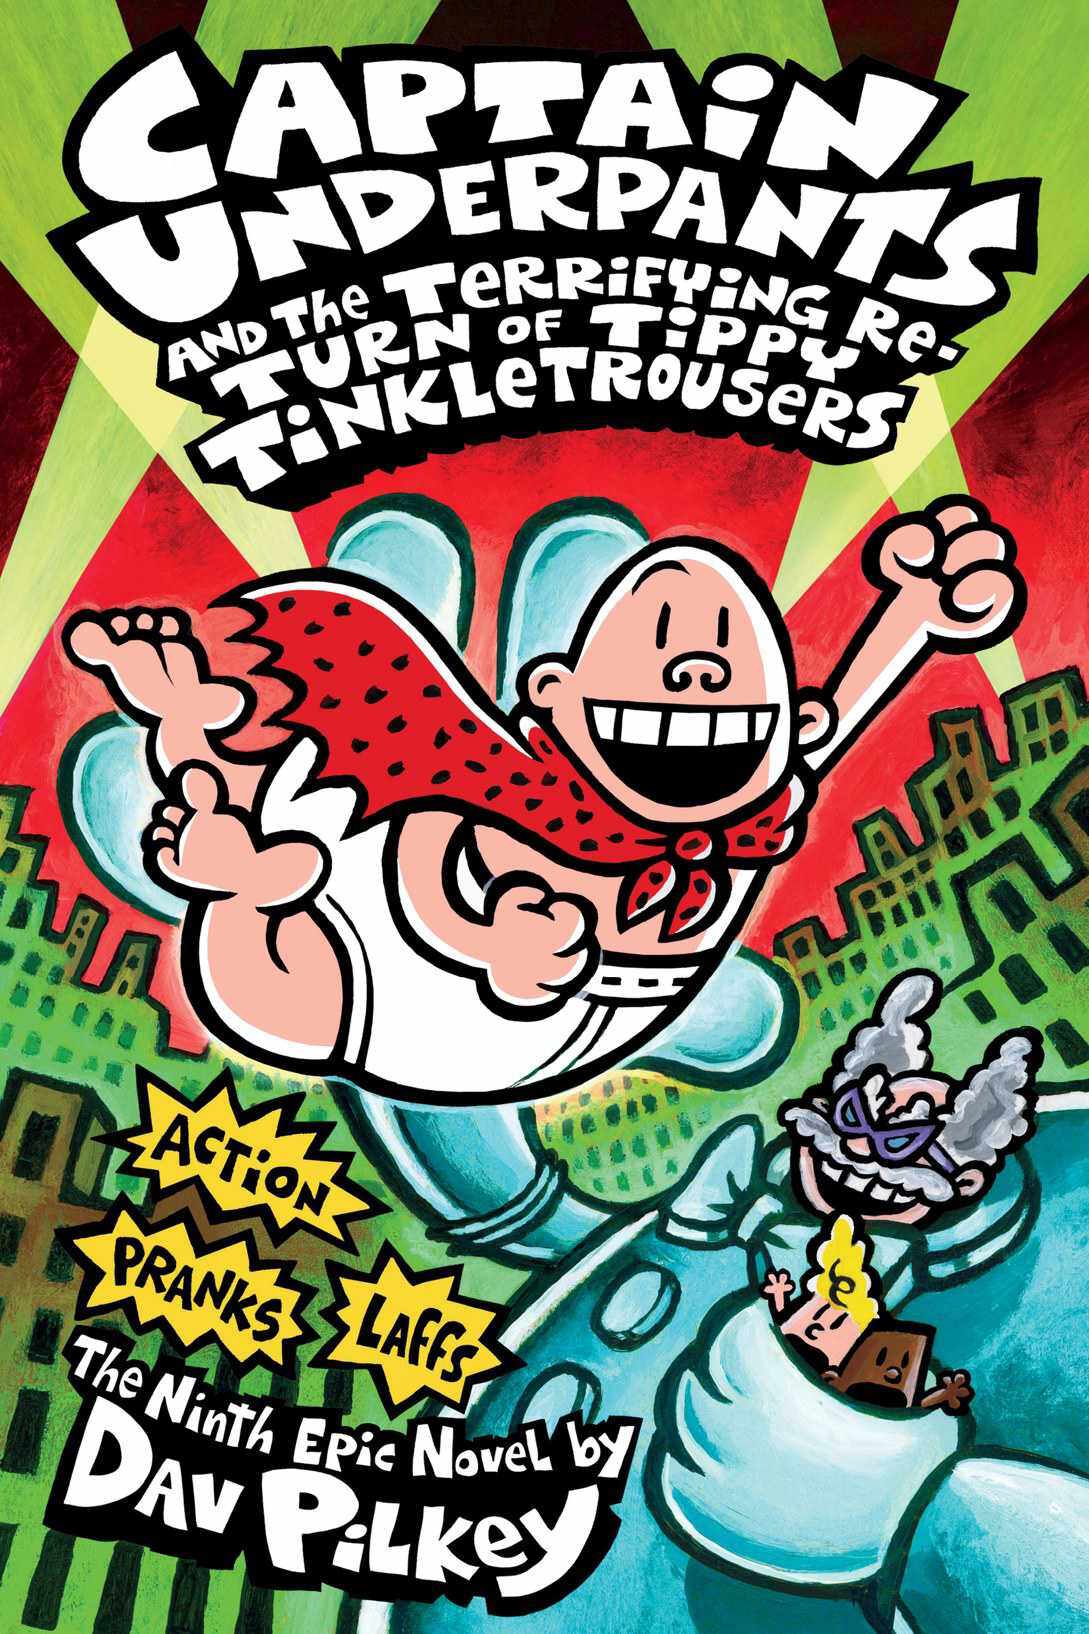 Captain Underpants and the Preposterous Plight of the Purple Potty People -  Wikipedia